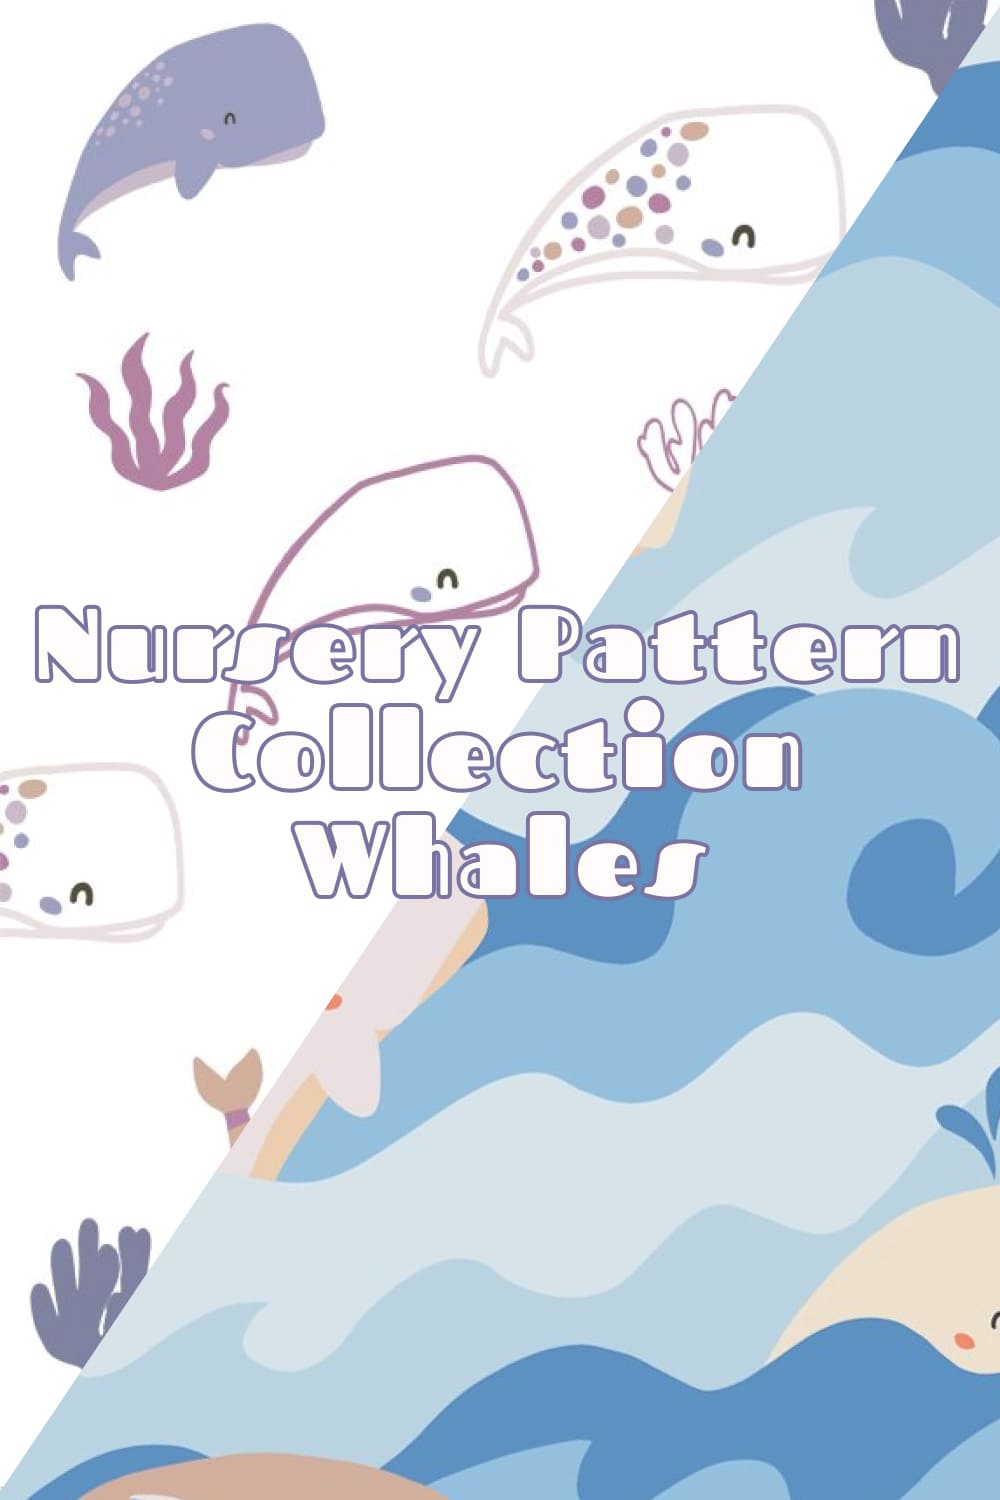 Nursery Pattern Collection - Whales Set - preview image.